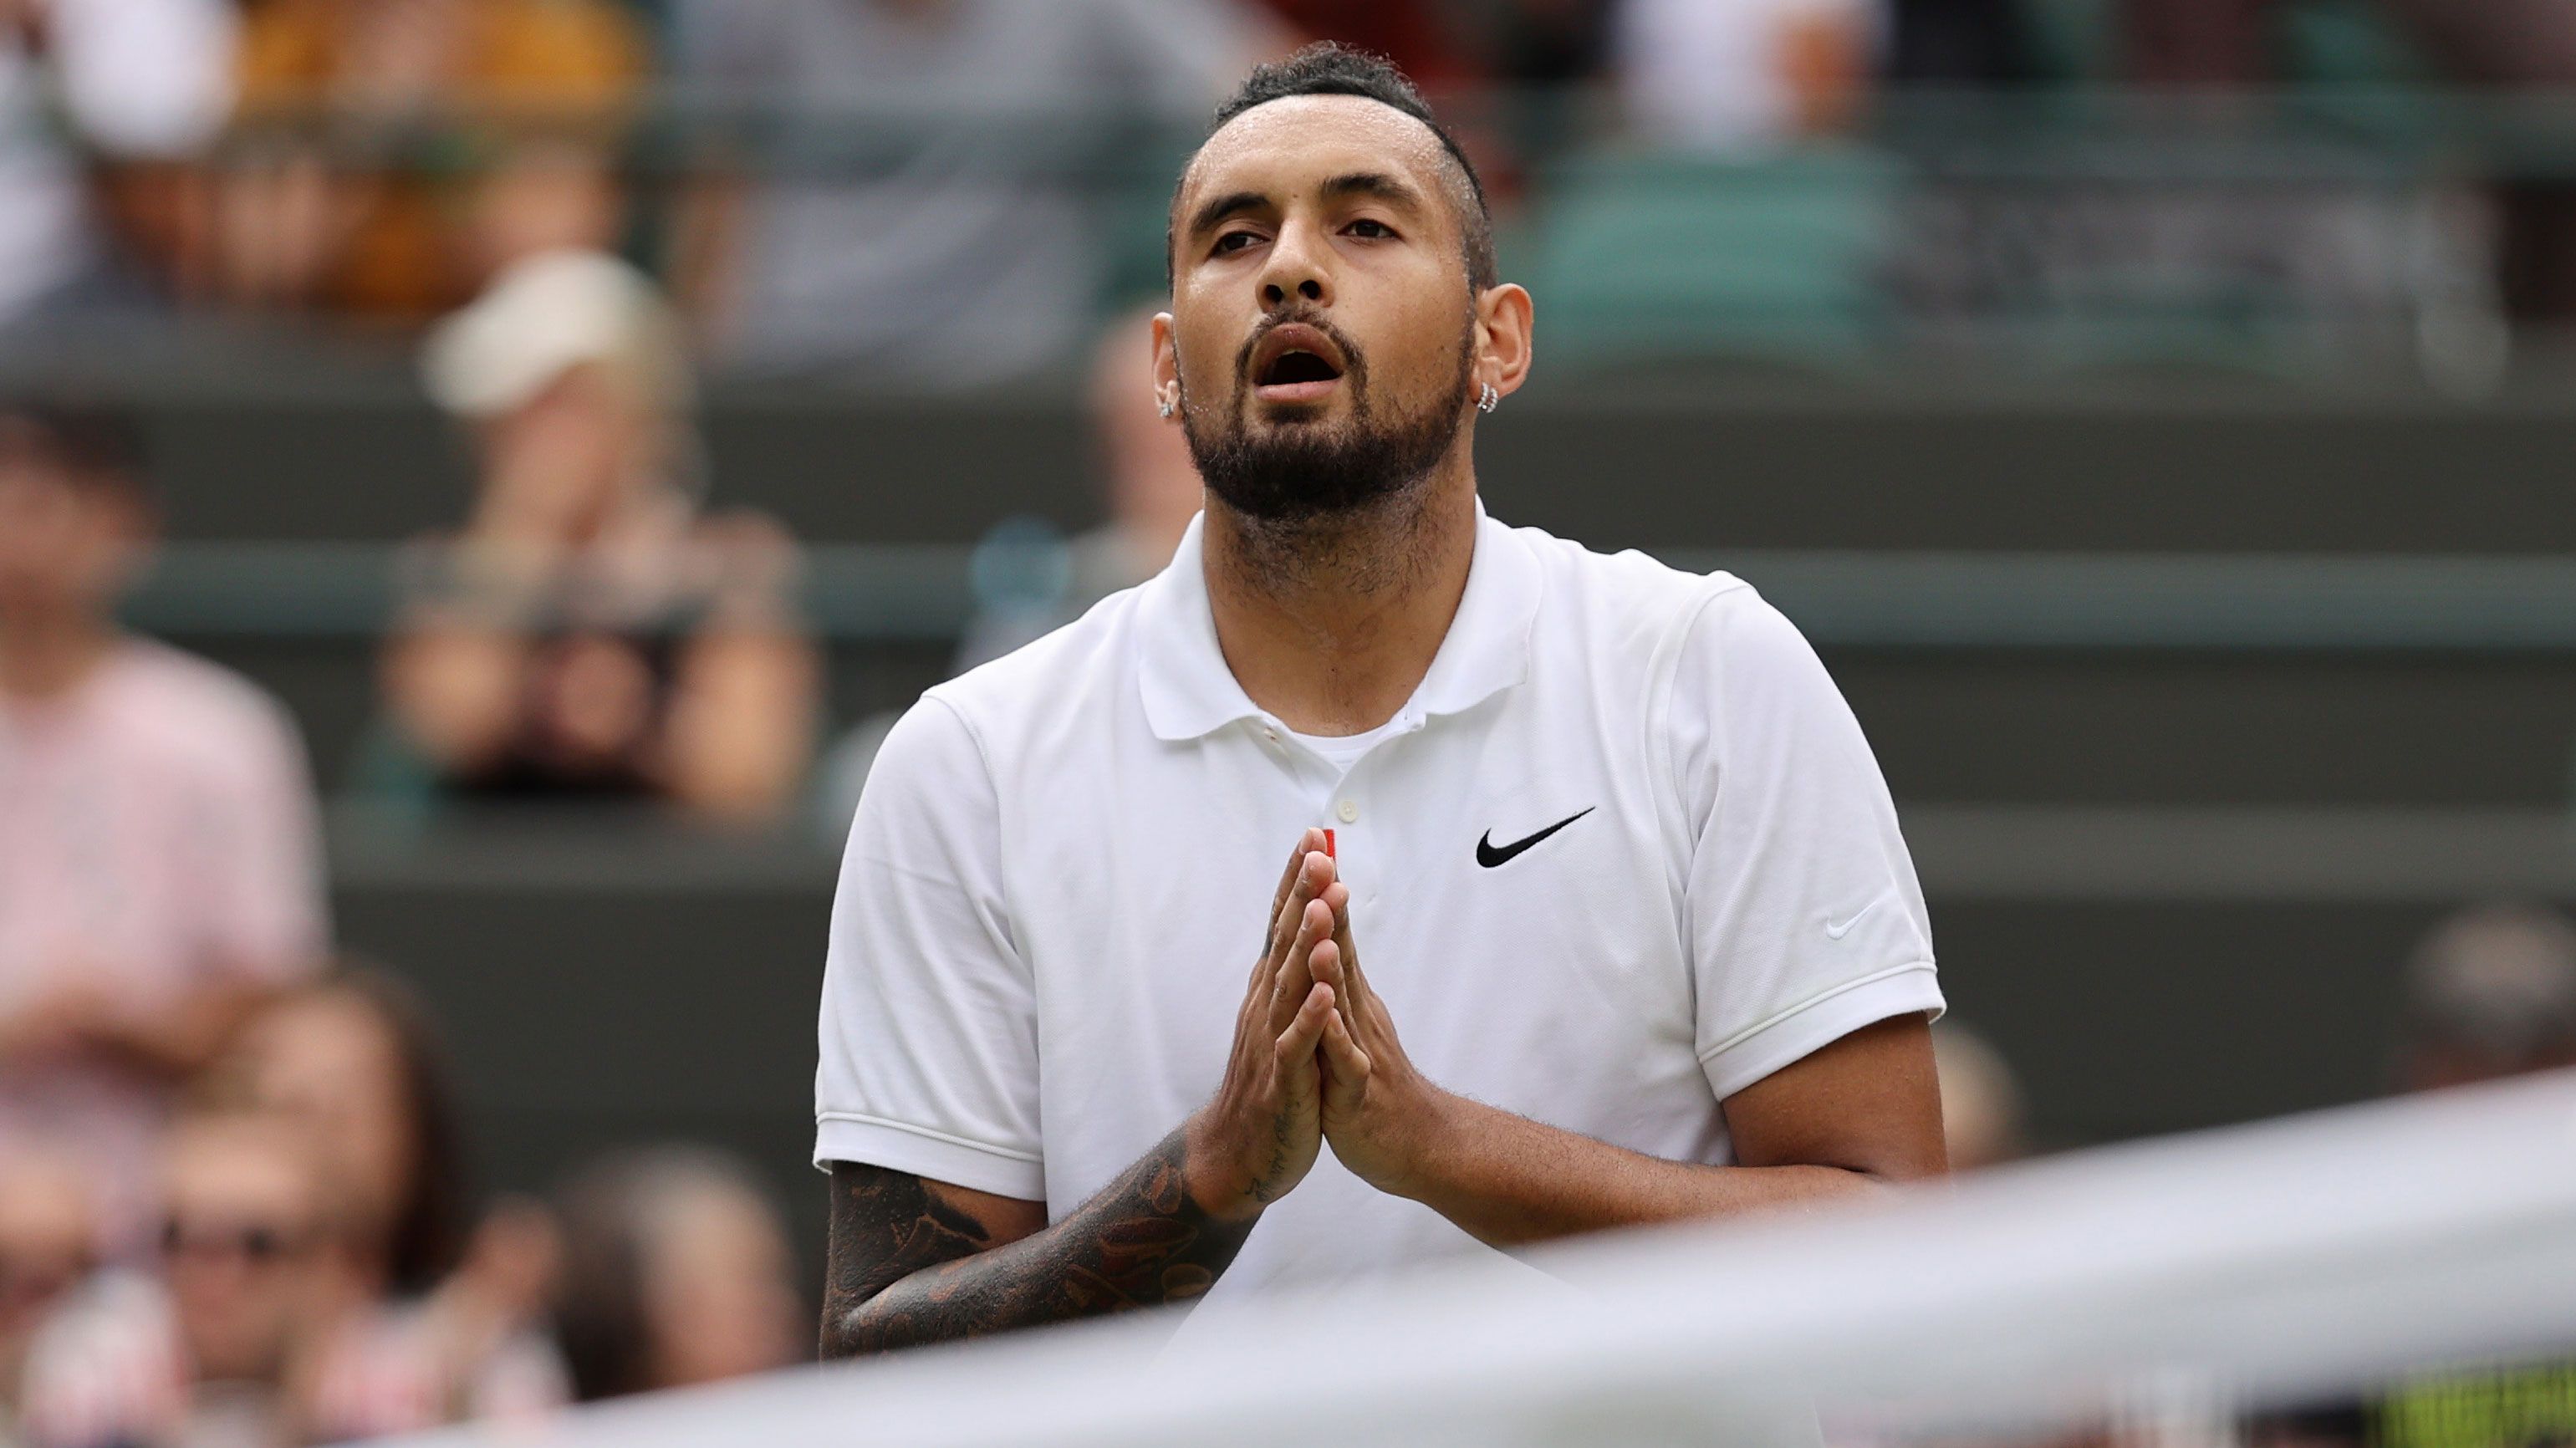 Nick Kyrgios interacts with the crowd after retiring from WImbledon due to injury in 2021.